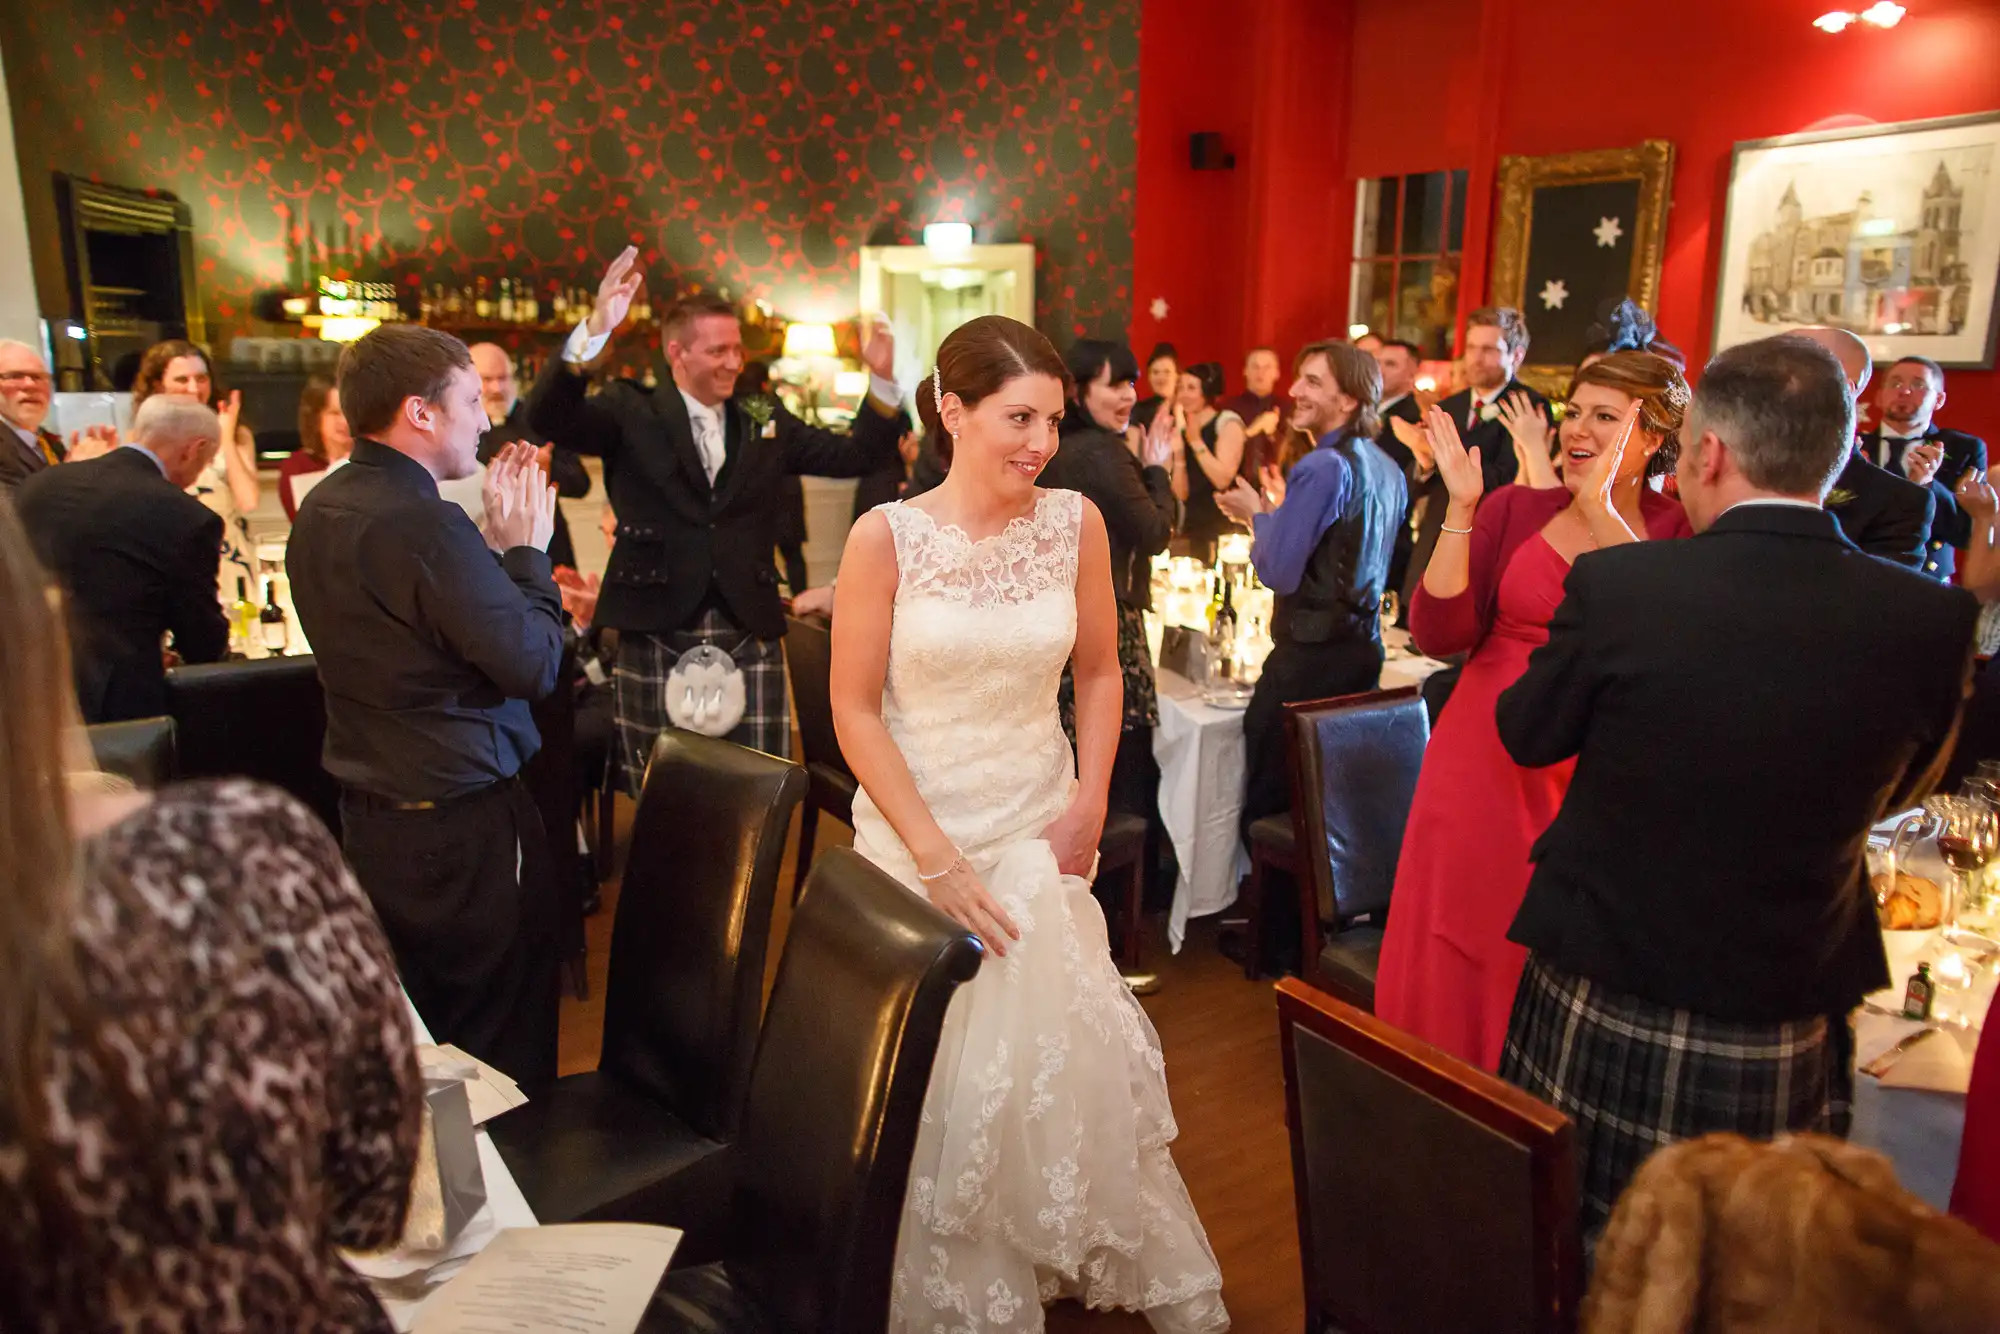 A bride walking through a restaurant during her wedding reception, being applauded by guests.